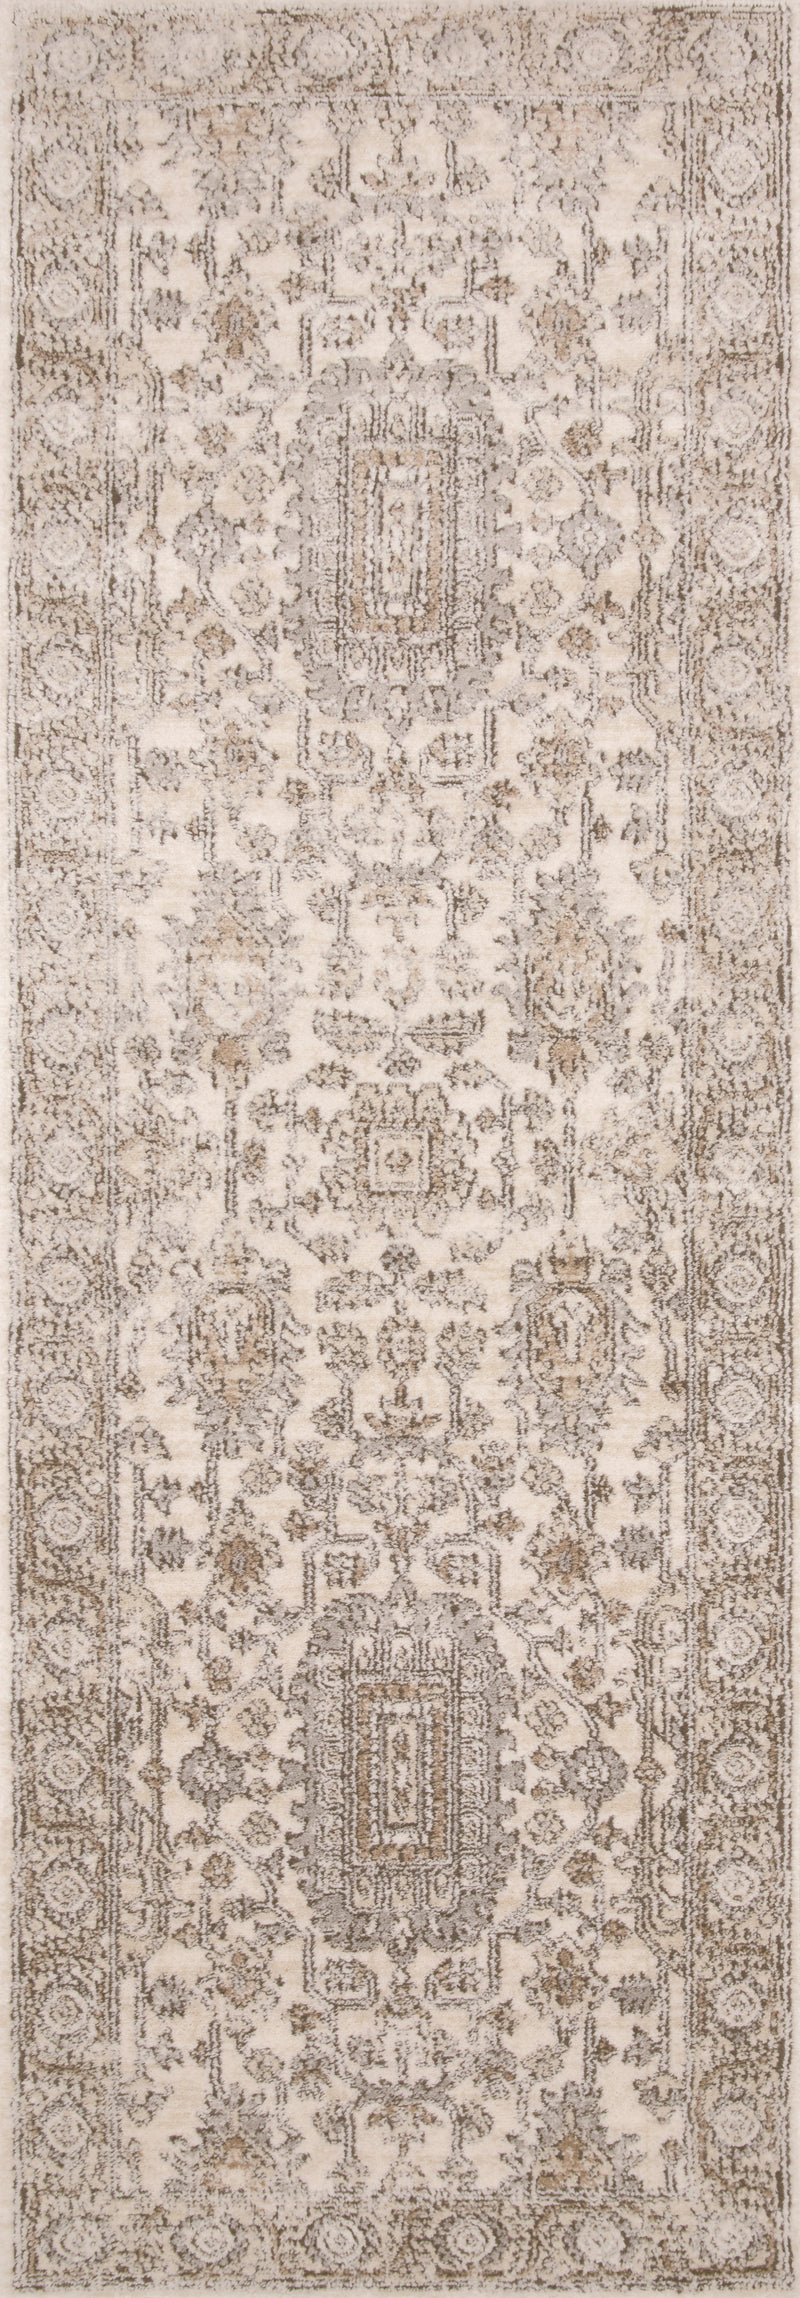 media image for Teagan Rug in Ivory / Sand by Loloi II 20